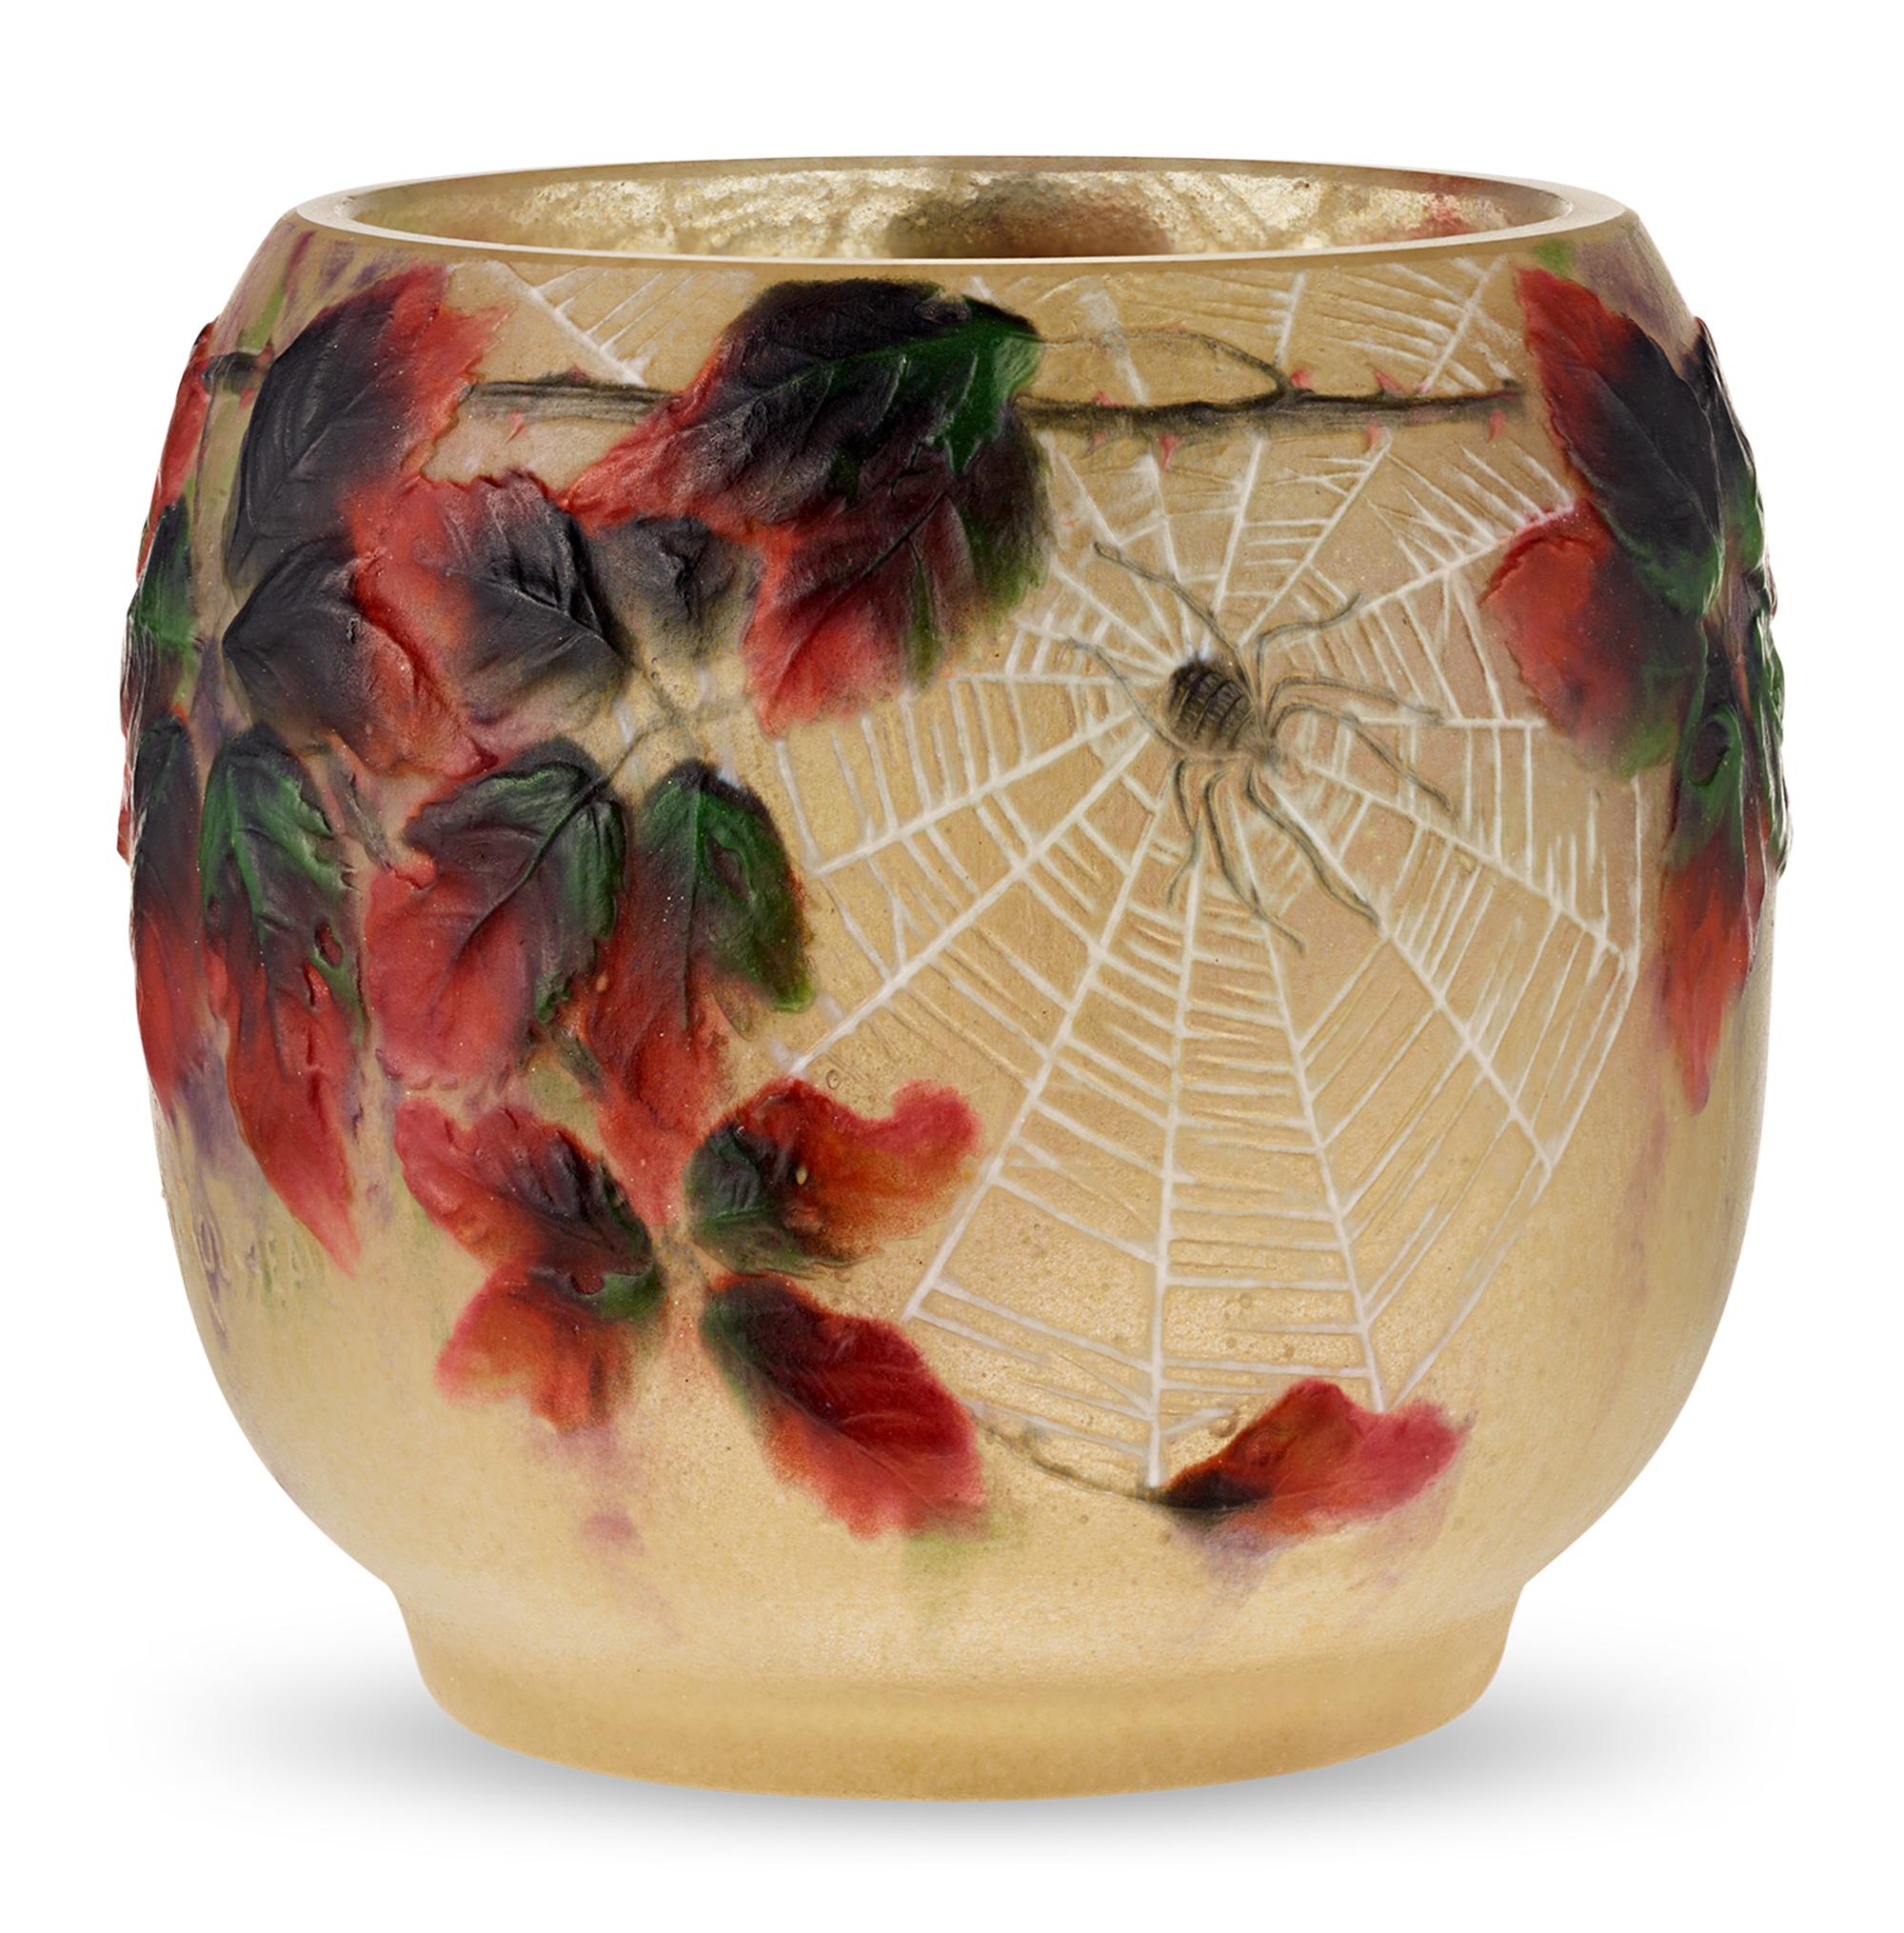 This highly rare and whimsical vase comes from the creative mind of Gabriel Argy-Rousseau, a celebrated Art Nouveau glassware designer and pioneer of the pâte de verre technique. Featuring the molded reliefs of spiders spinning webs amongst tangled